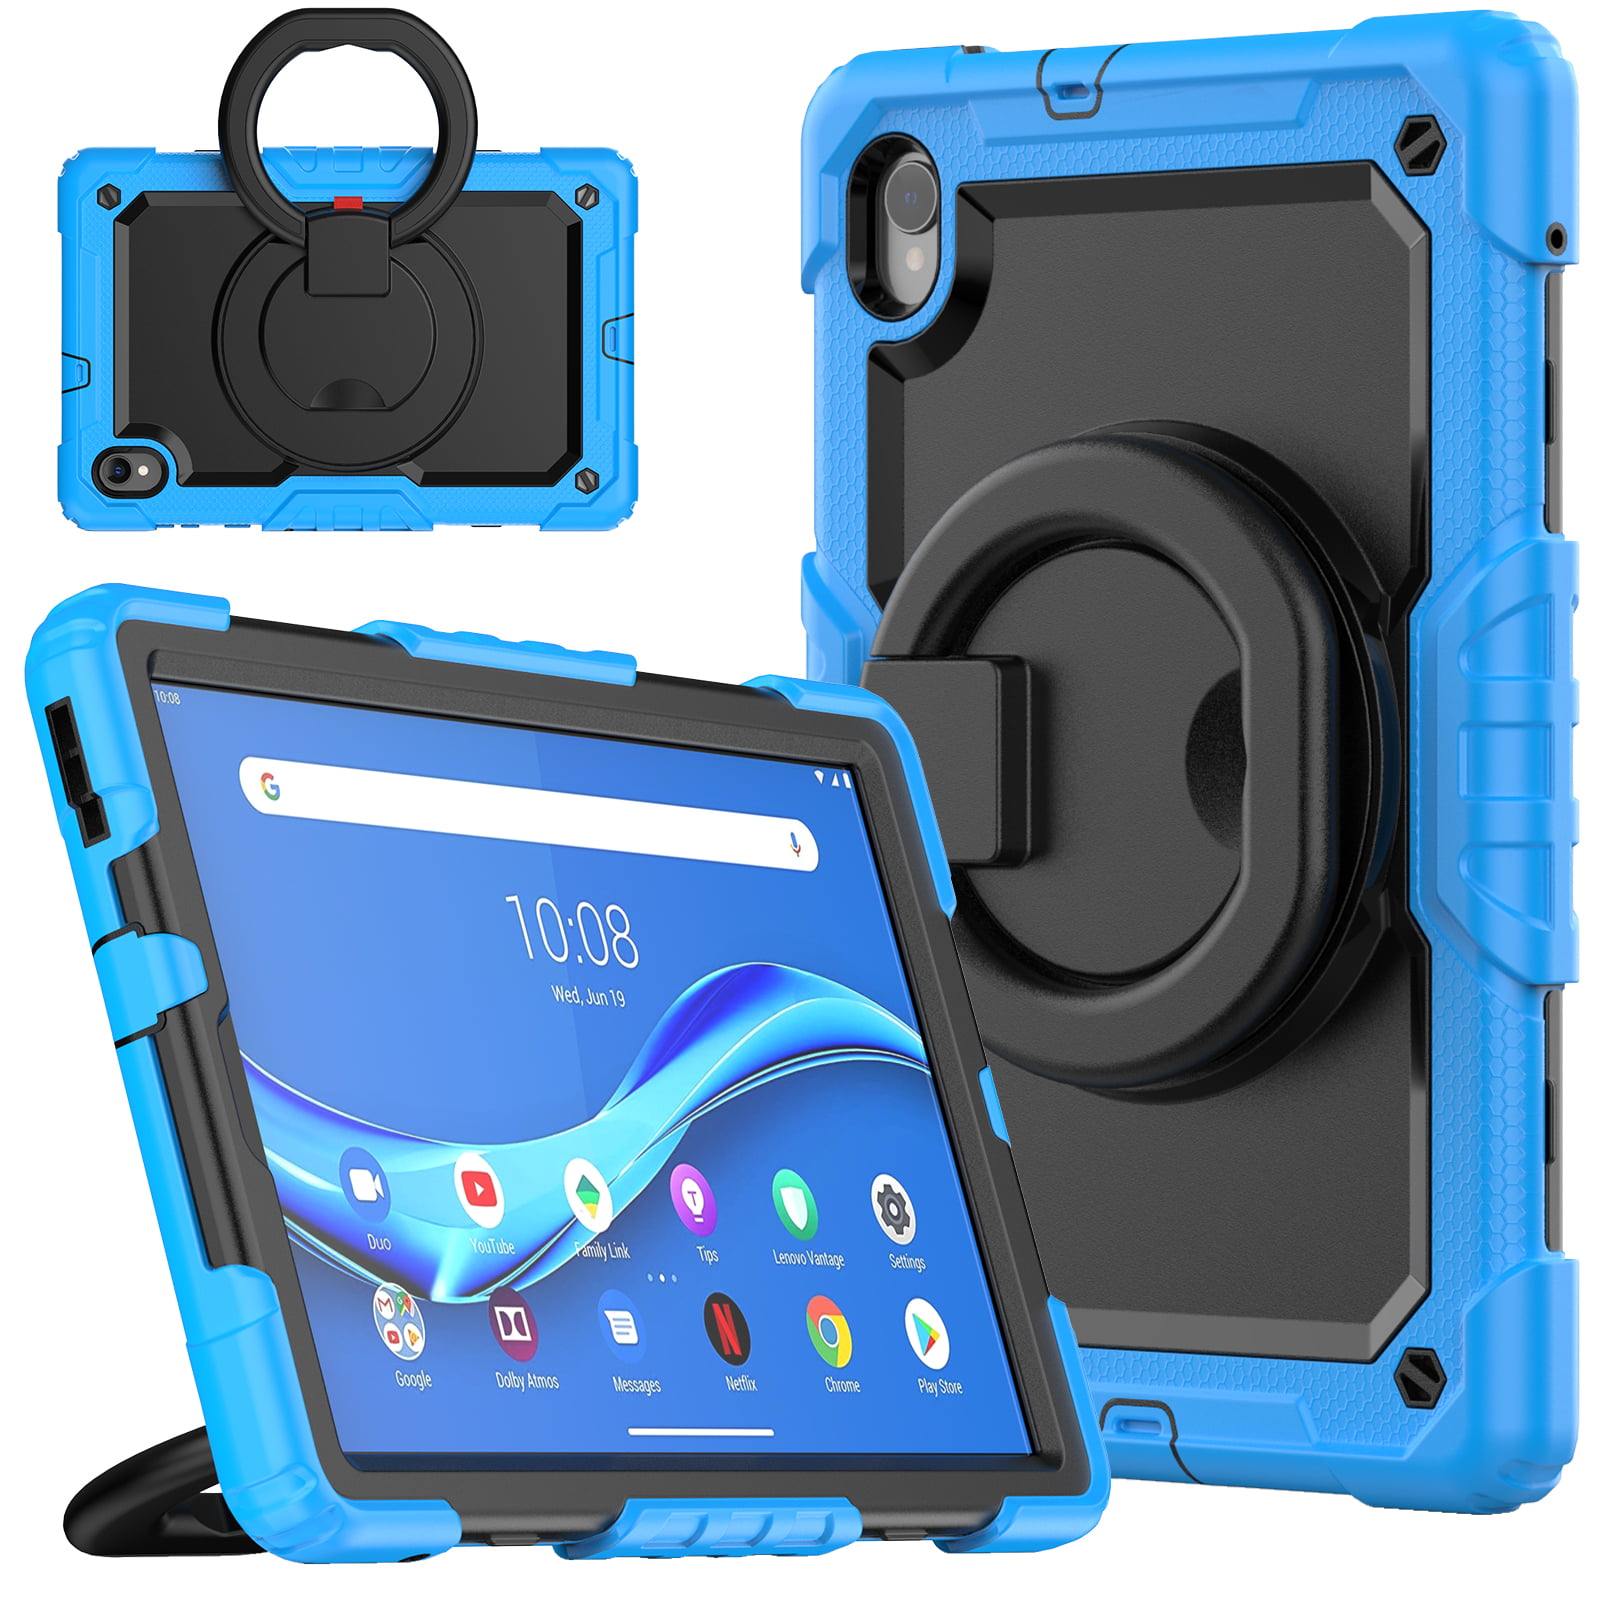 TECH CIRCLE Case for Lenovo Tab M10 Plus (10.3) (TB-X606F) Tablet - Heavy  Duty Protection Rugged Case with Kickstand Portable Handle Drop Proof  Cover, Rainbowblue 